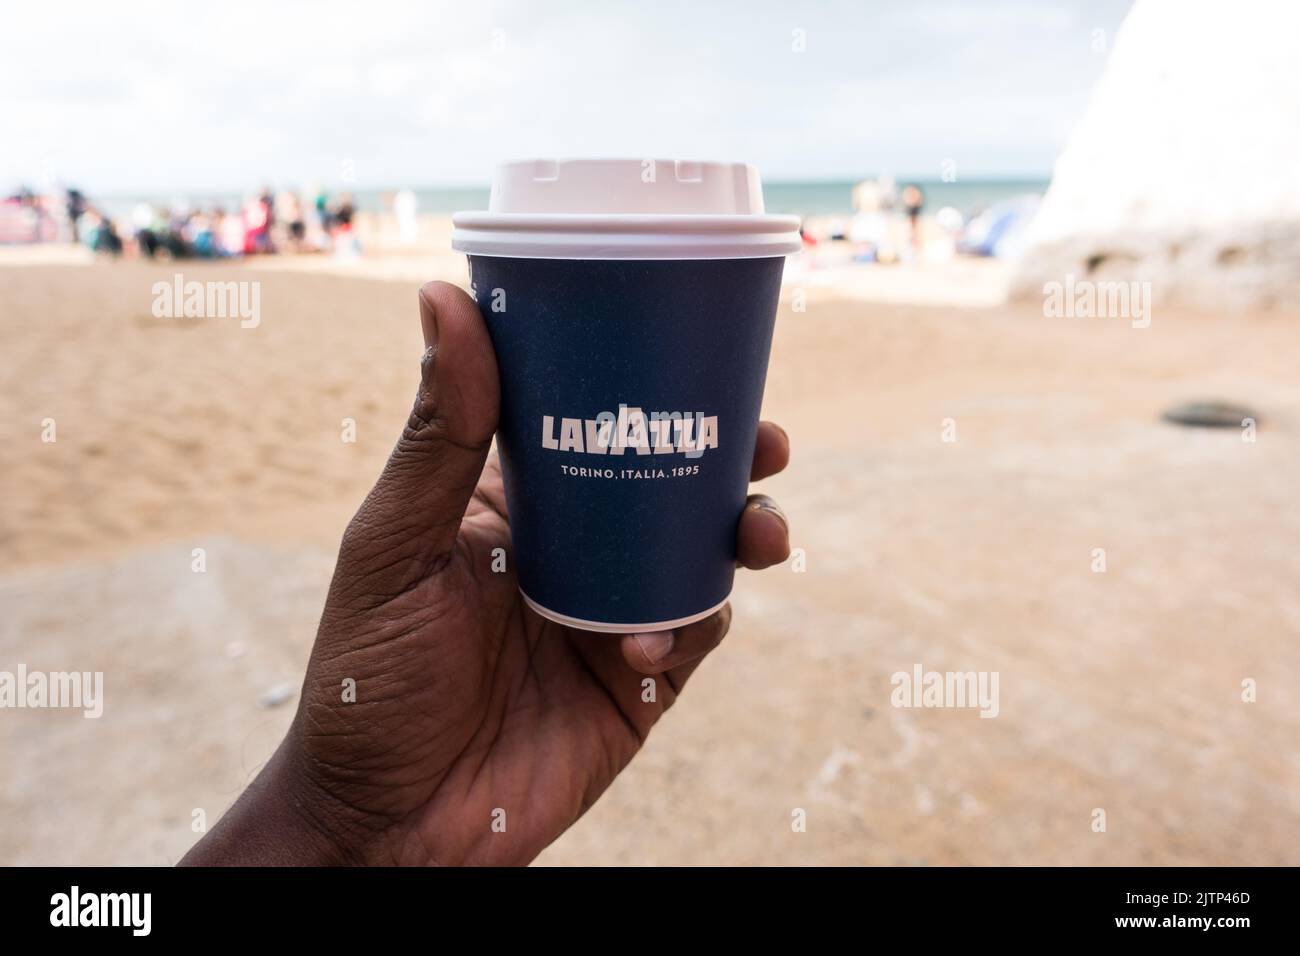 LavAzza take away coffee cup in adult males hand at a beach shore Stock Photo